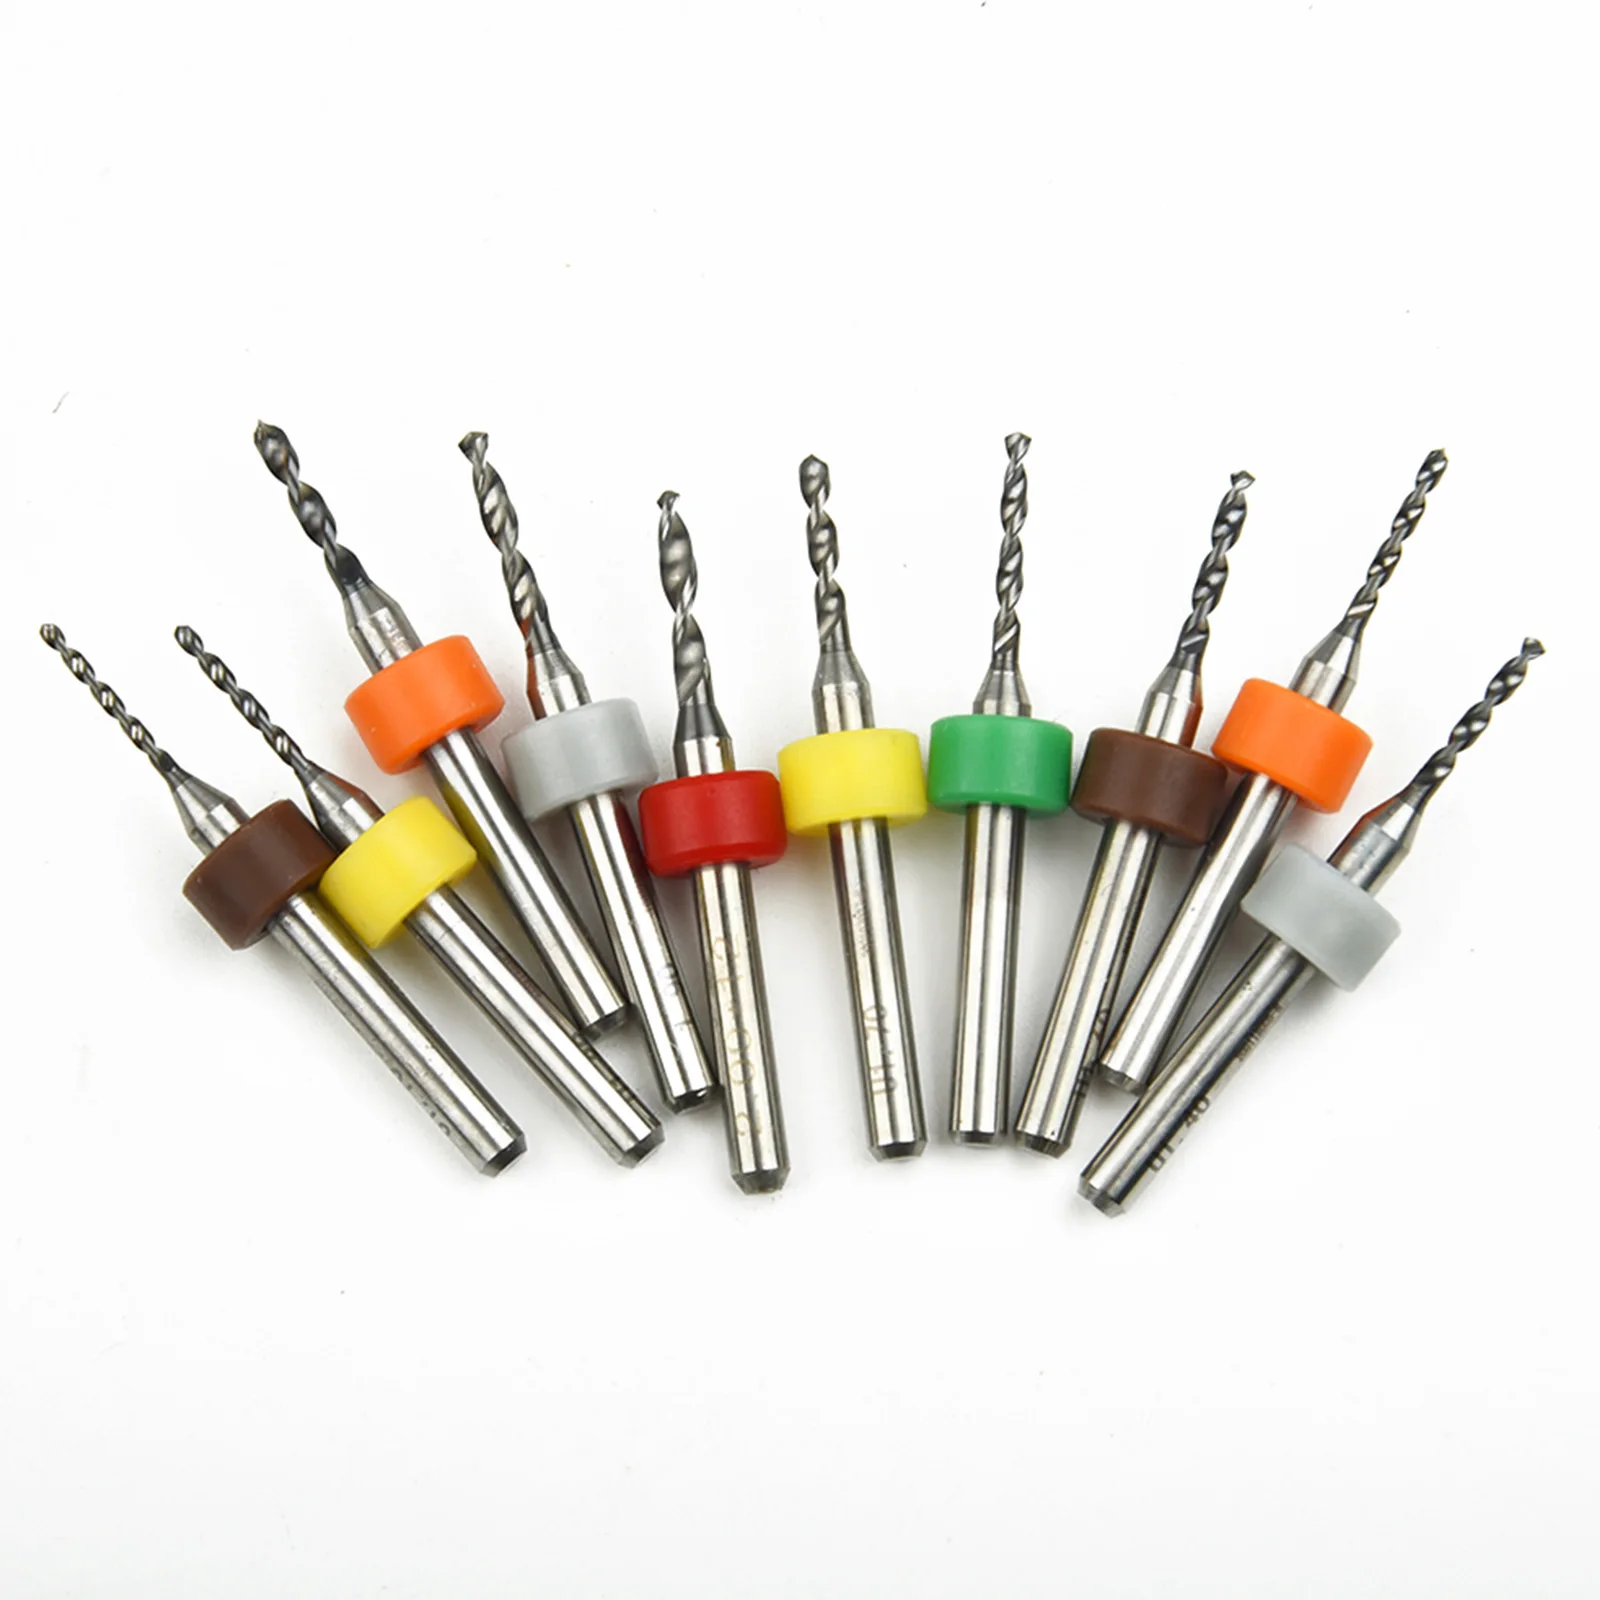 Drill Bits Cutter Tools Premium Tungsten Carbide Micro Drill Bits for Precision CNC Engraving 11mm to 20mm Sizes